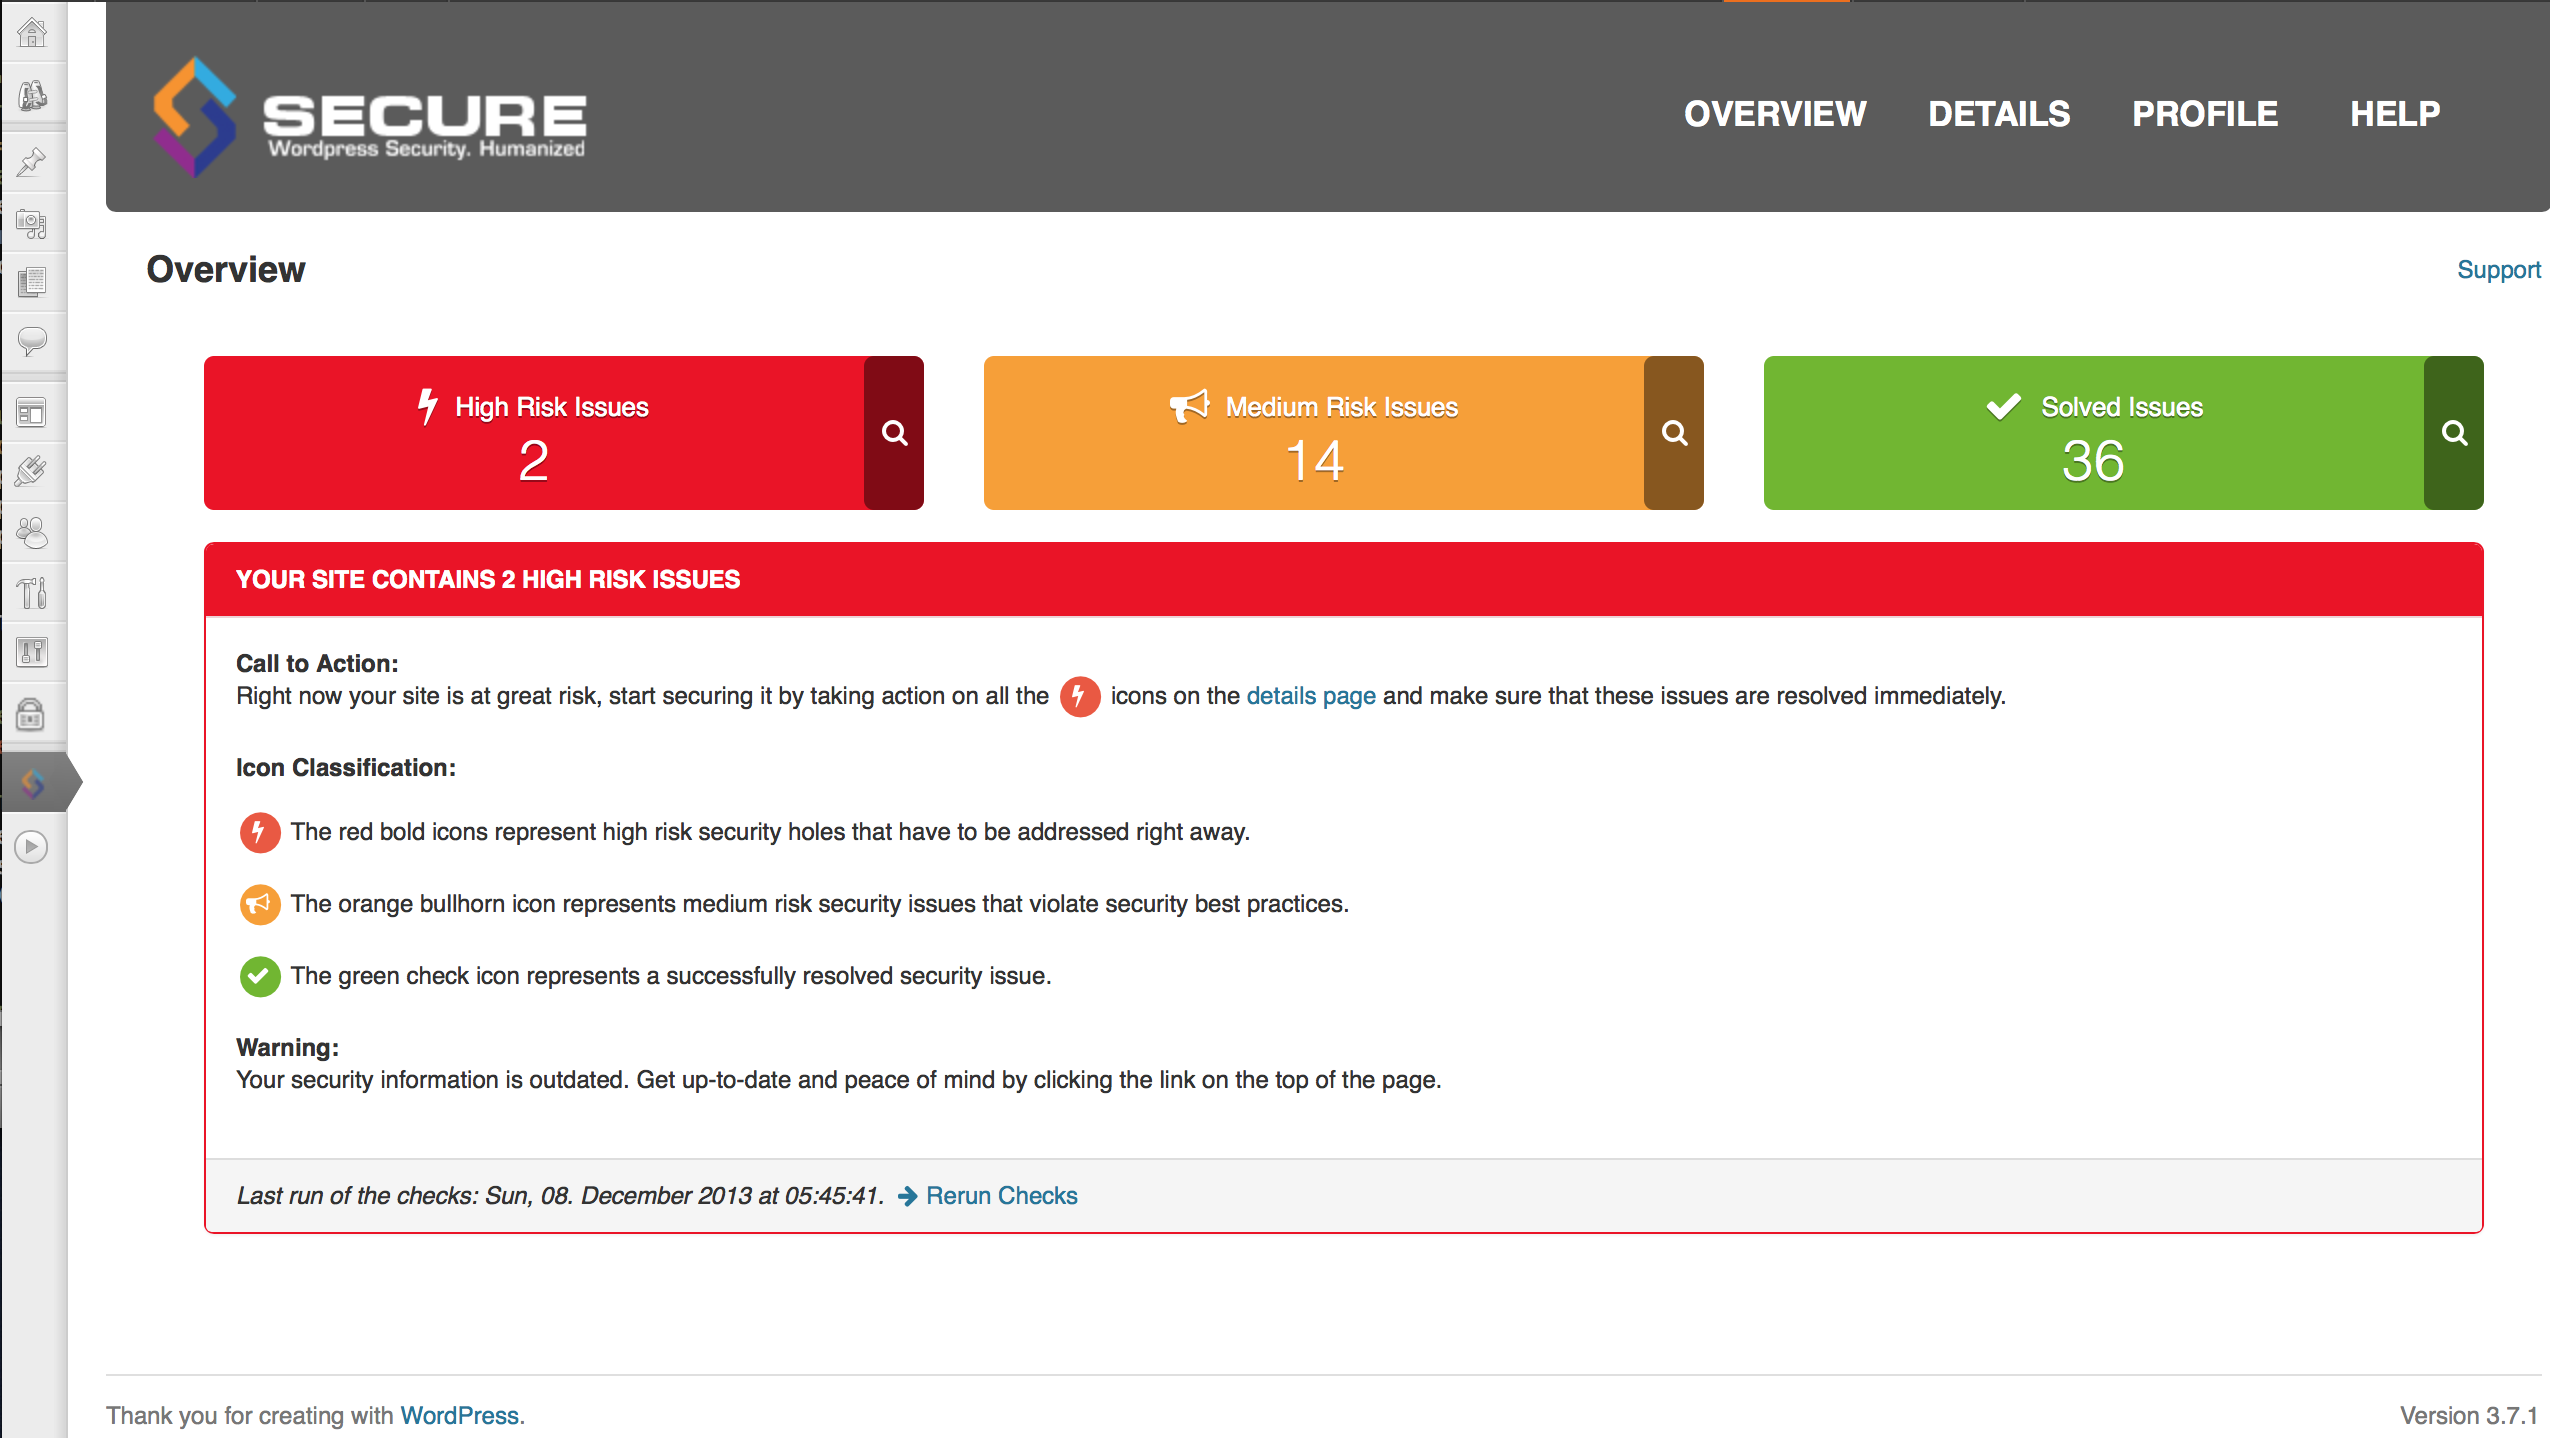 The start page of the plugin gives you an immediate overview of the security issues of your site.